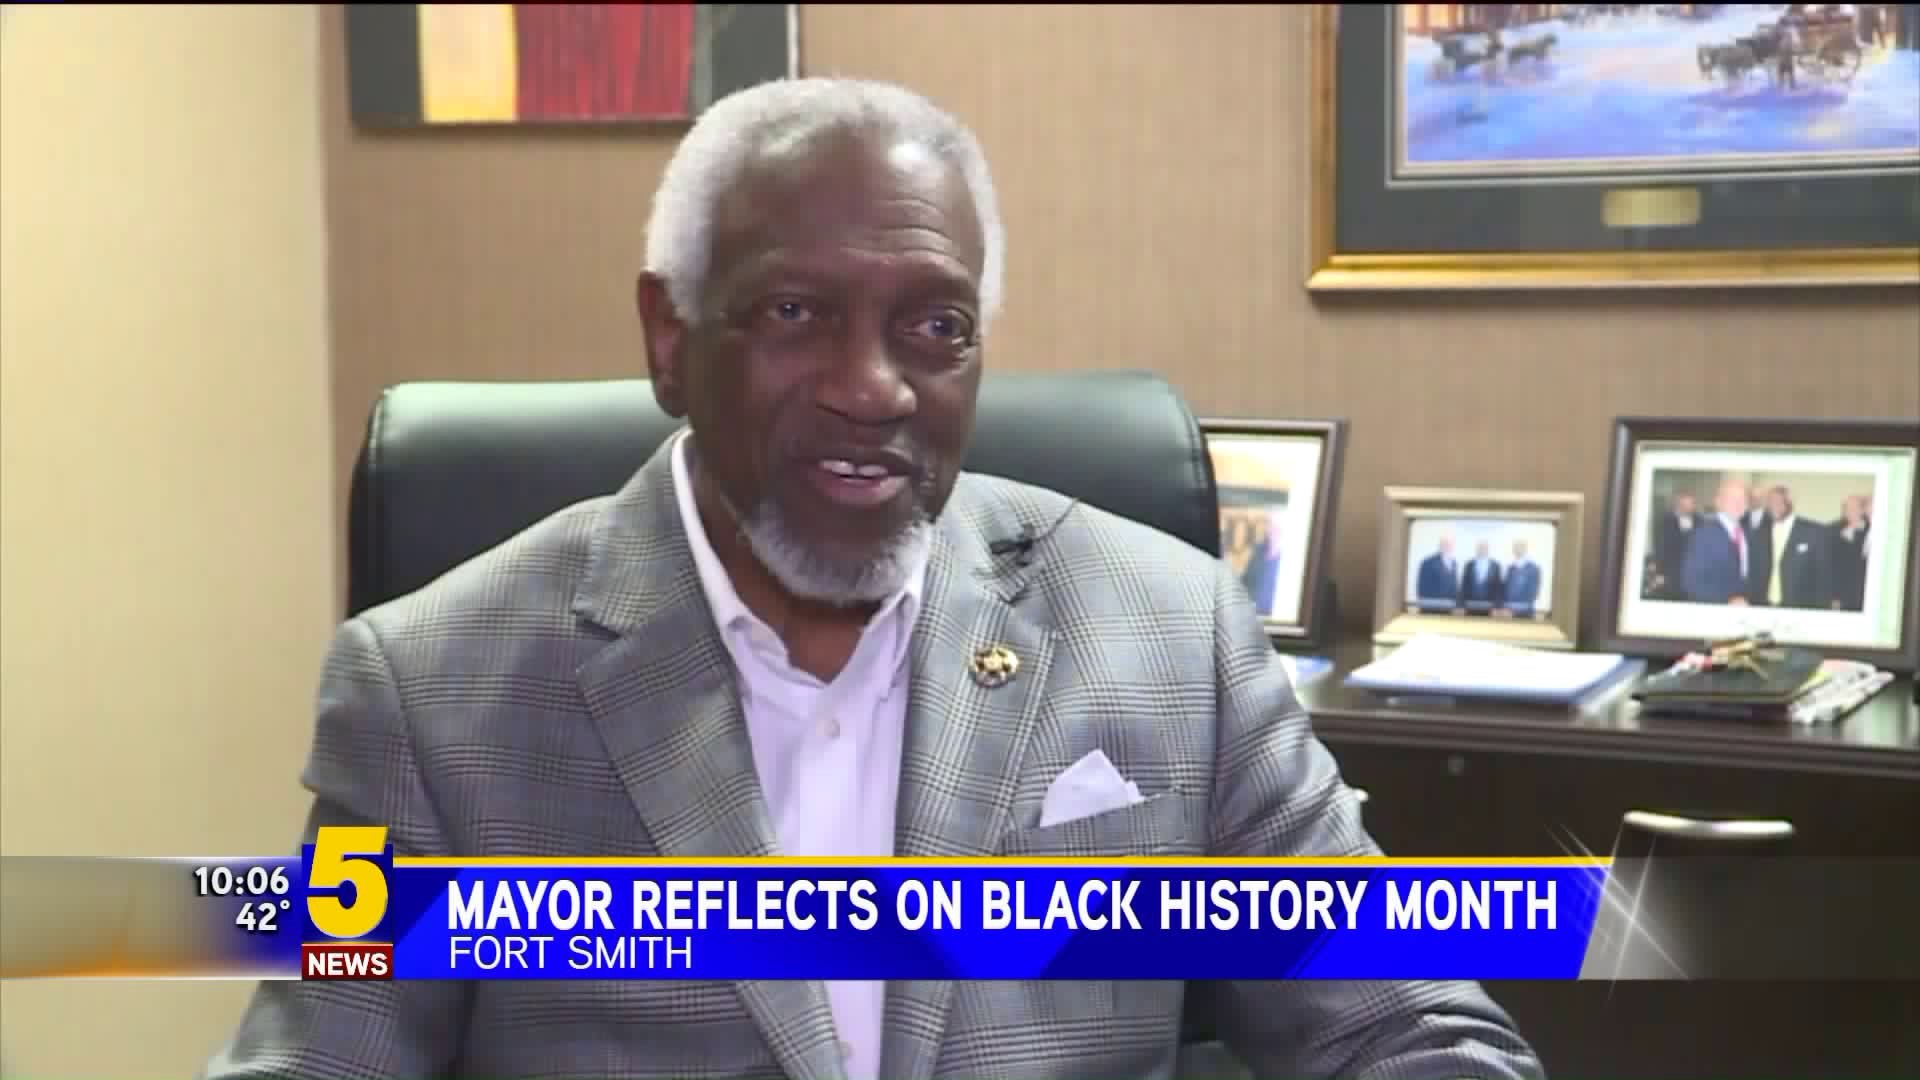 Fort Smith Mayor Reflects On Black History Month